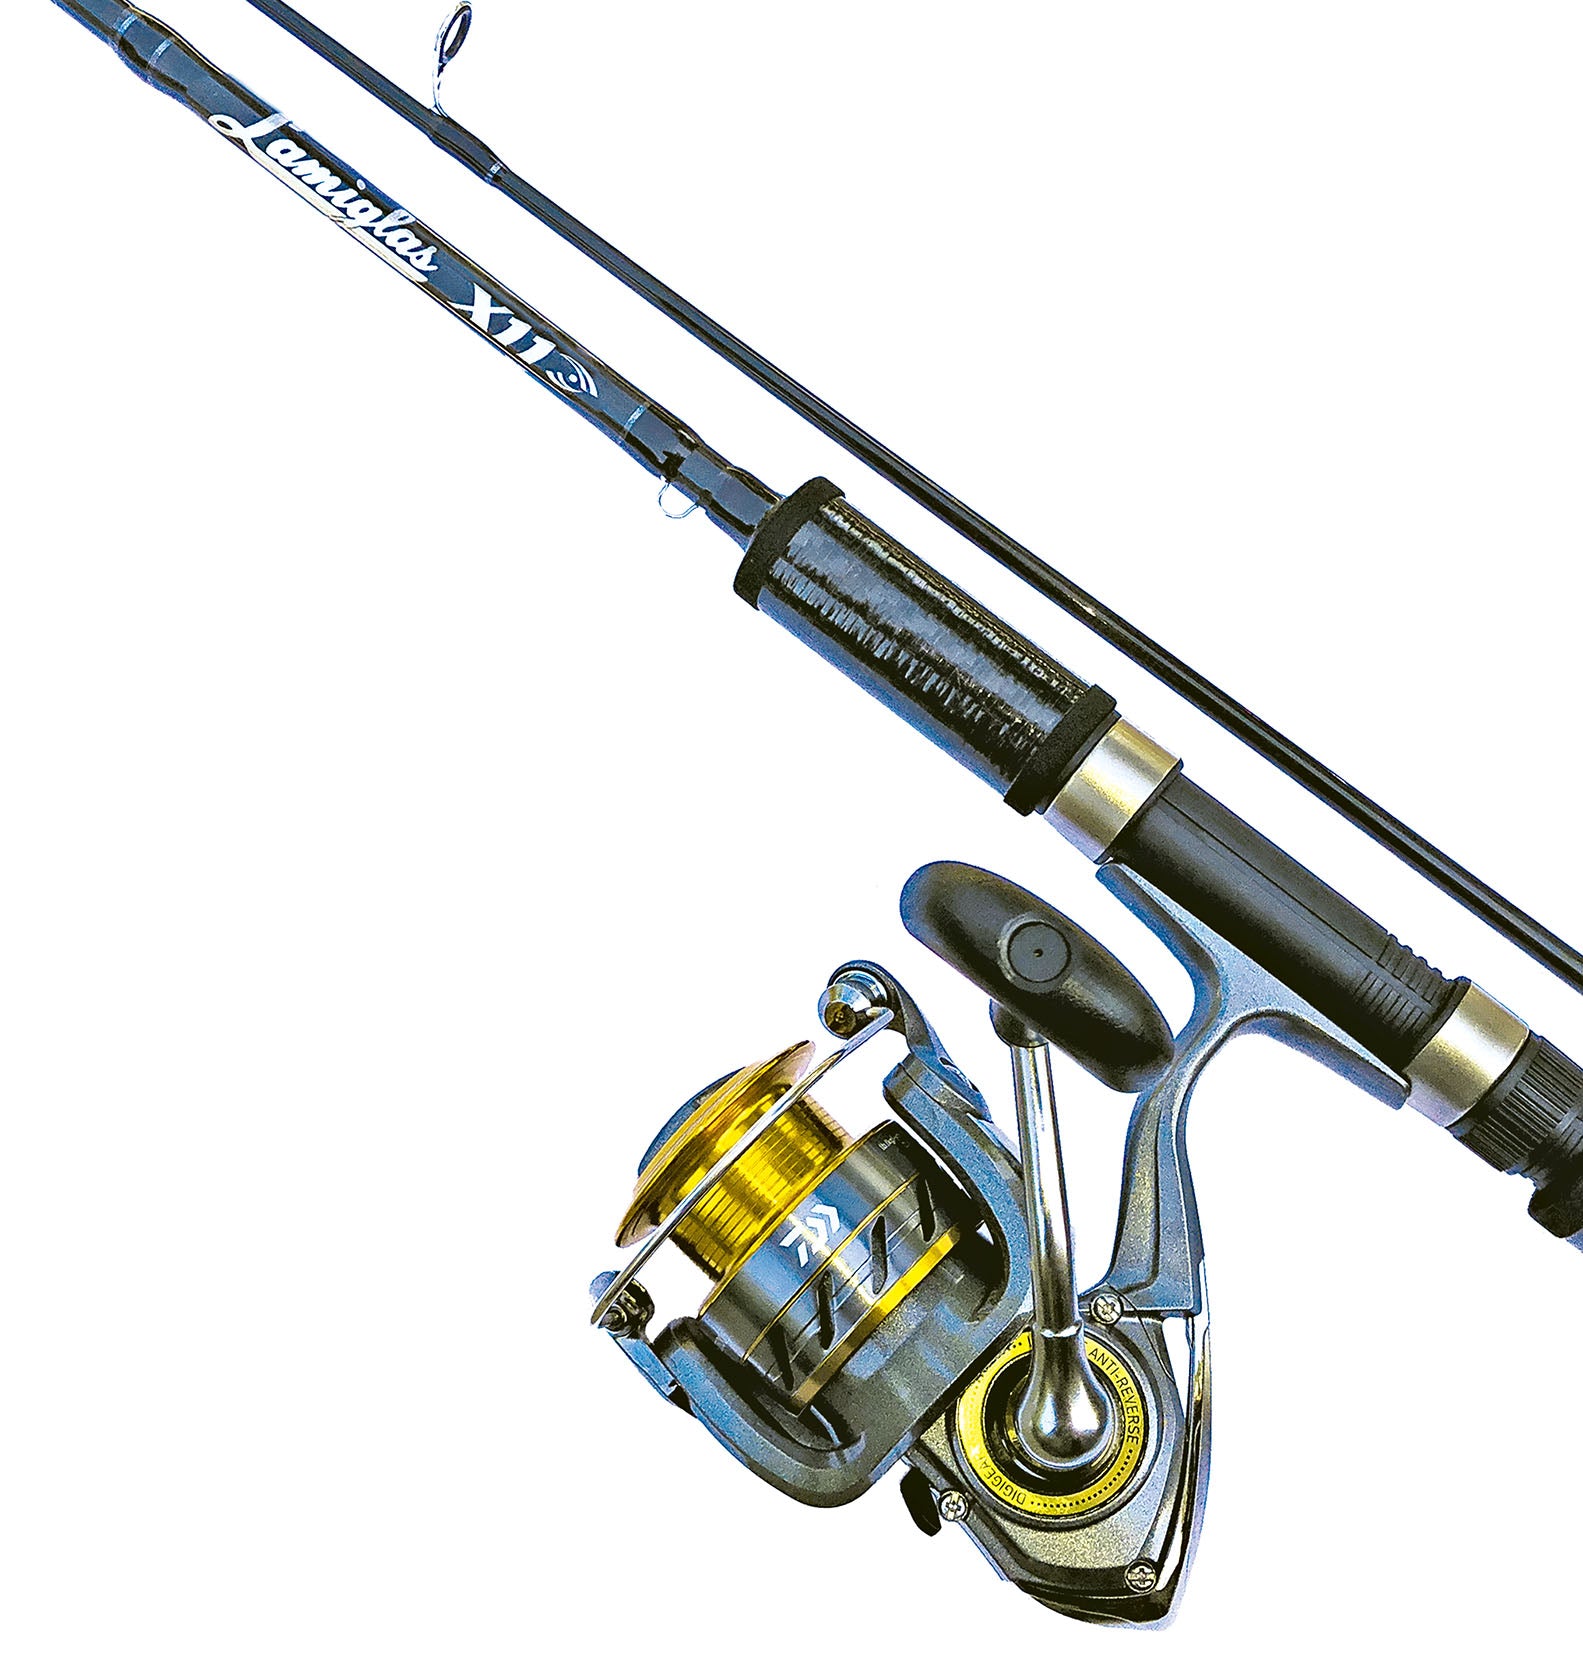 The BEST Spinning Rod & Reel For Trout Fishing! 